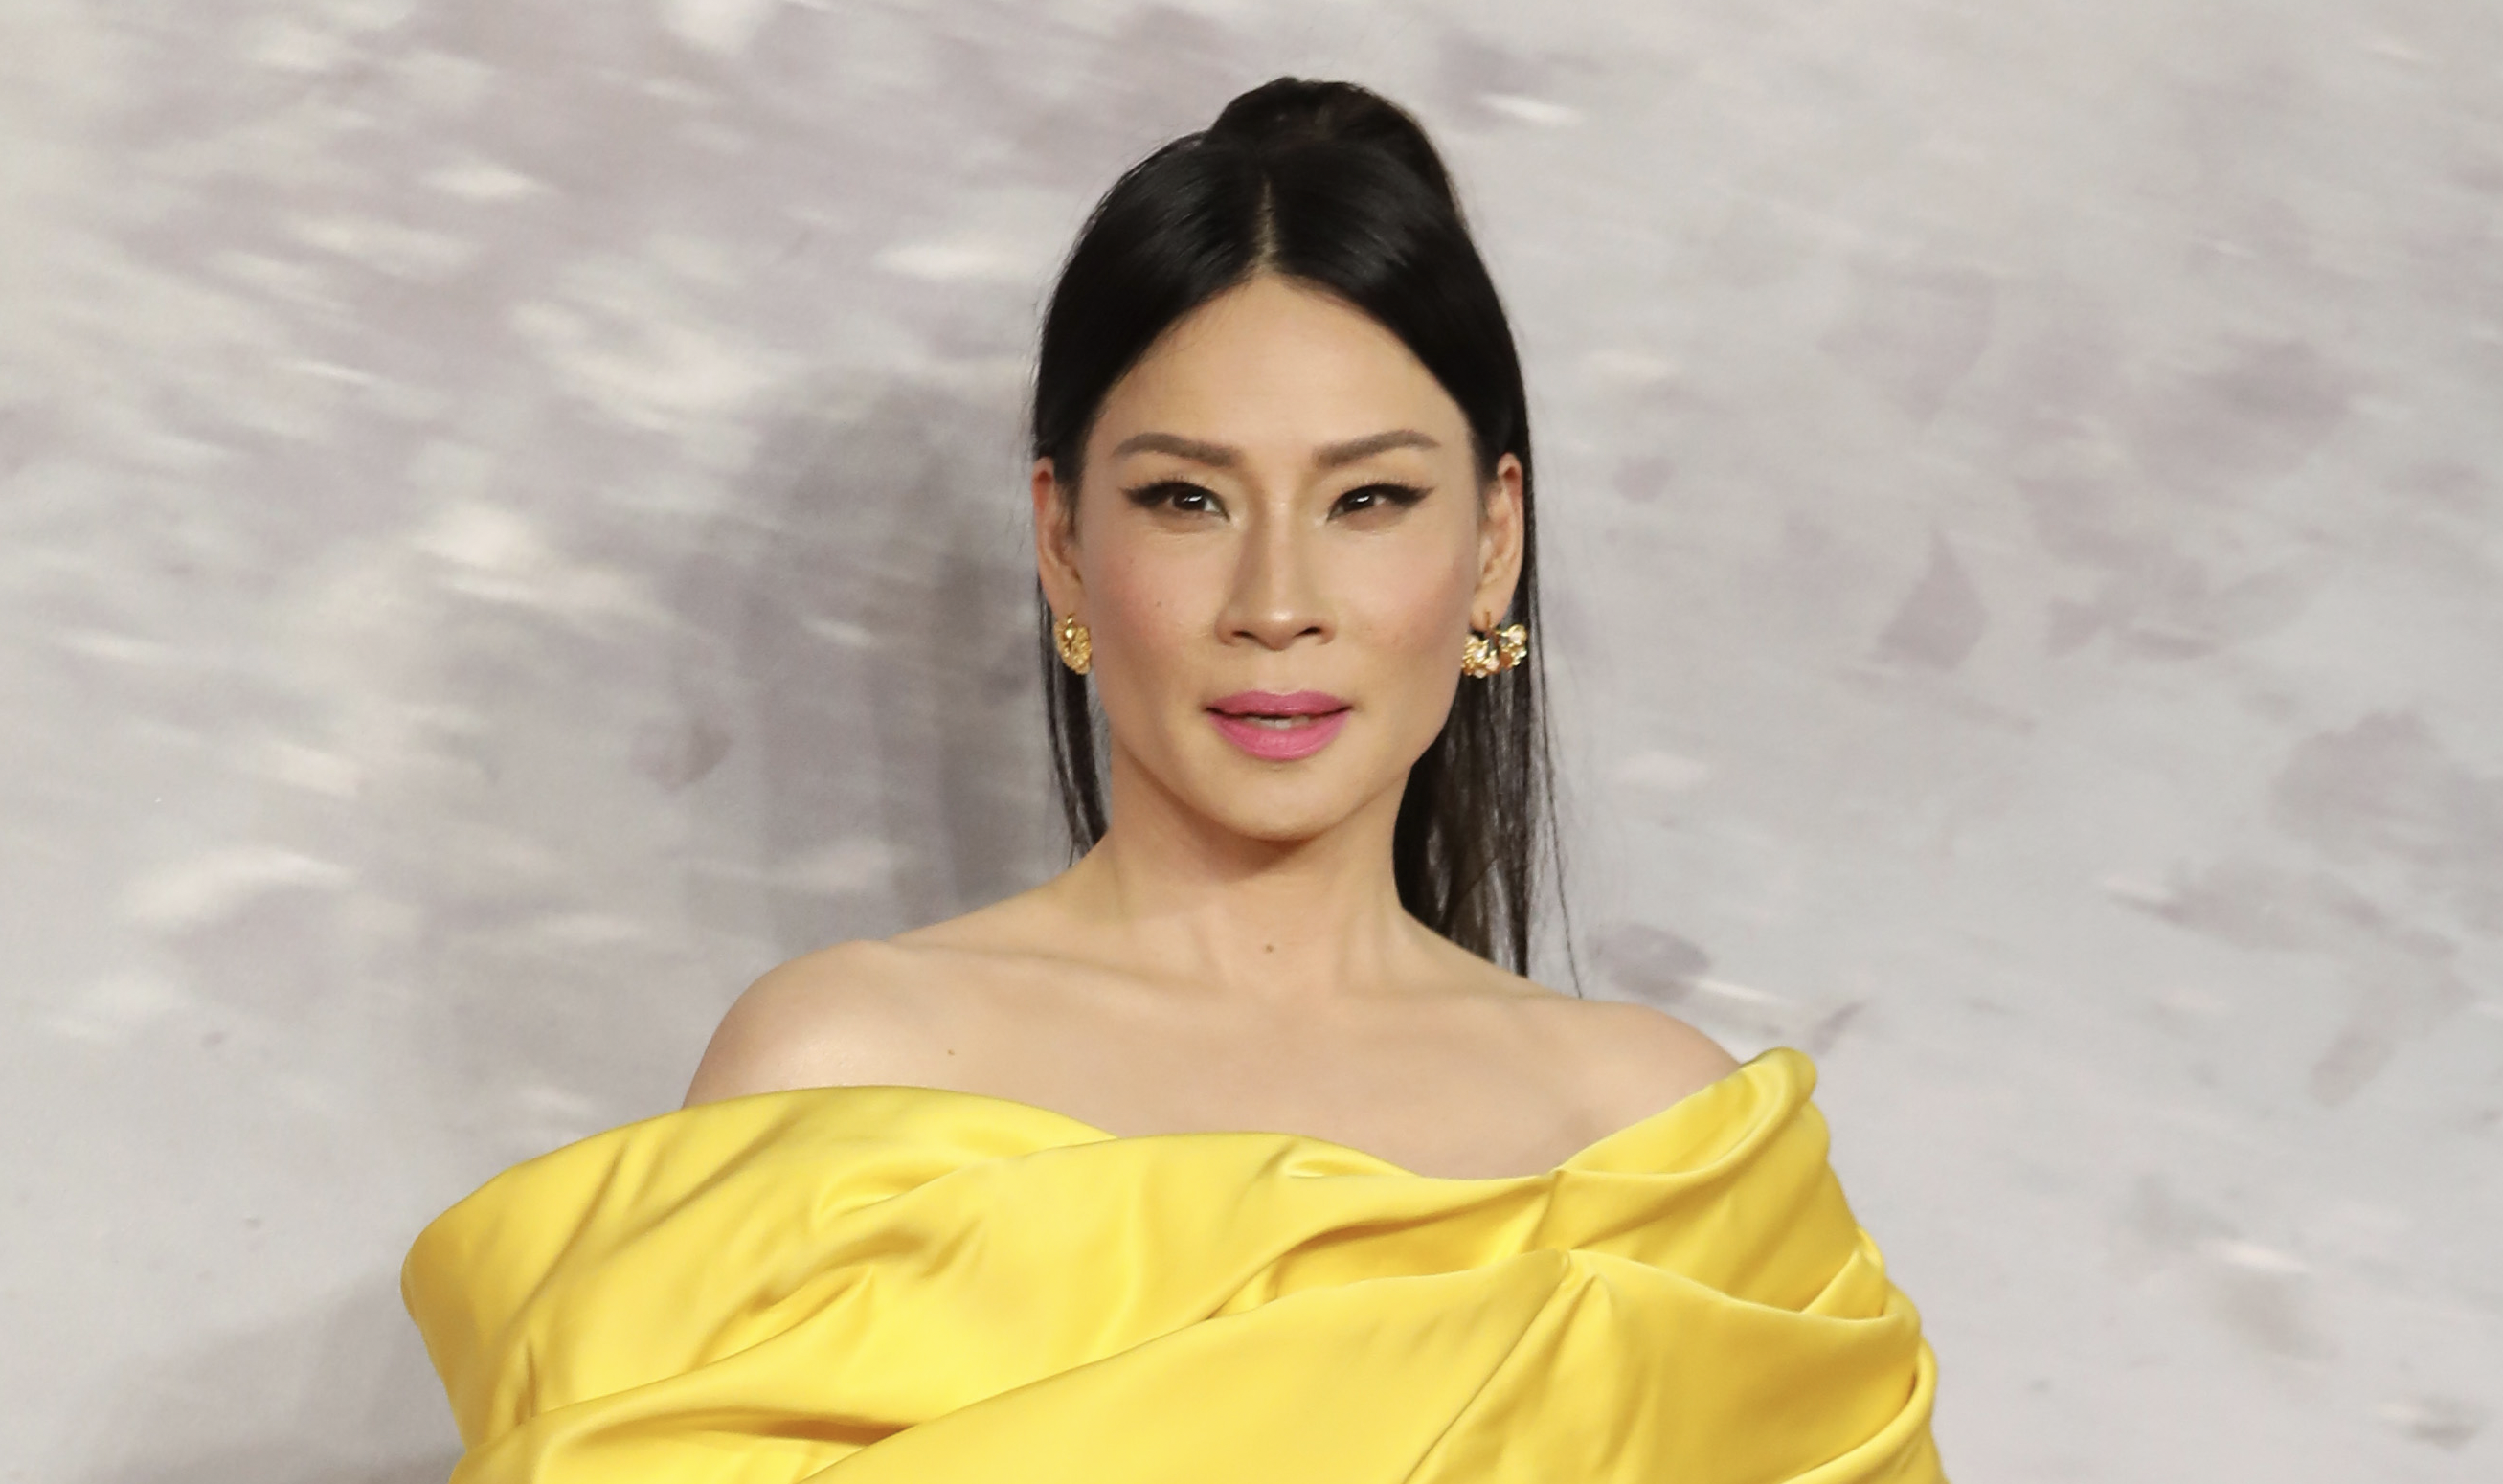 Lucy Liu on Why She Spent Five Years Bringing ‘Rosemead’ to the Big Screen: ‘Even if One Person Sees It, That...